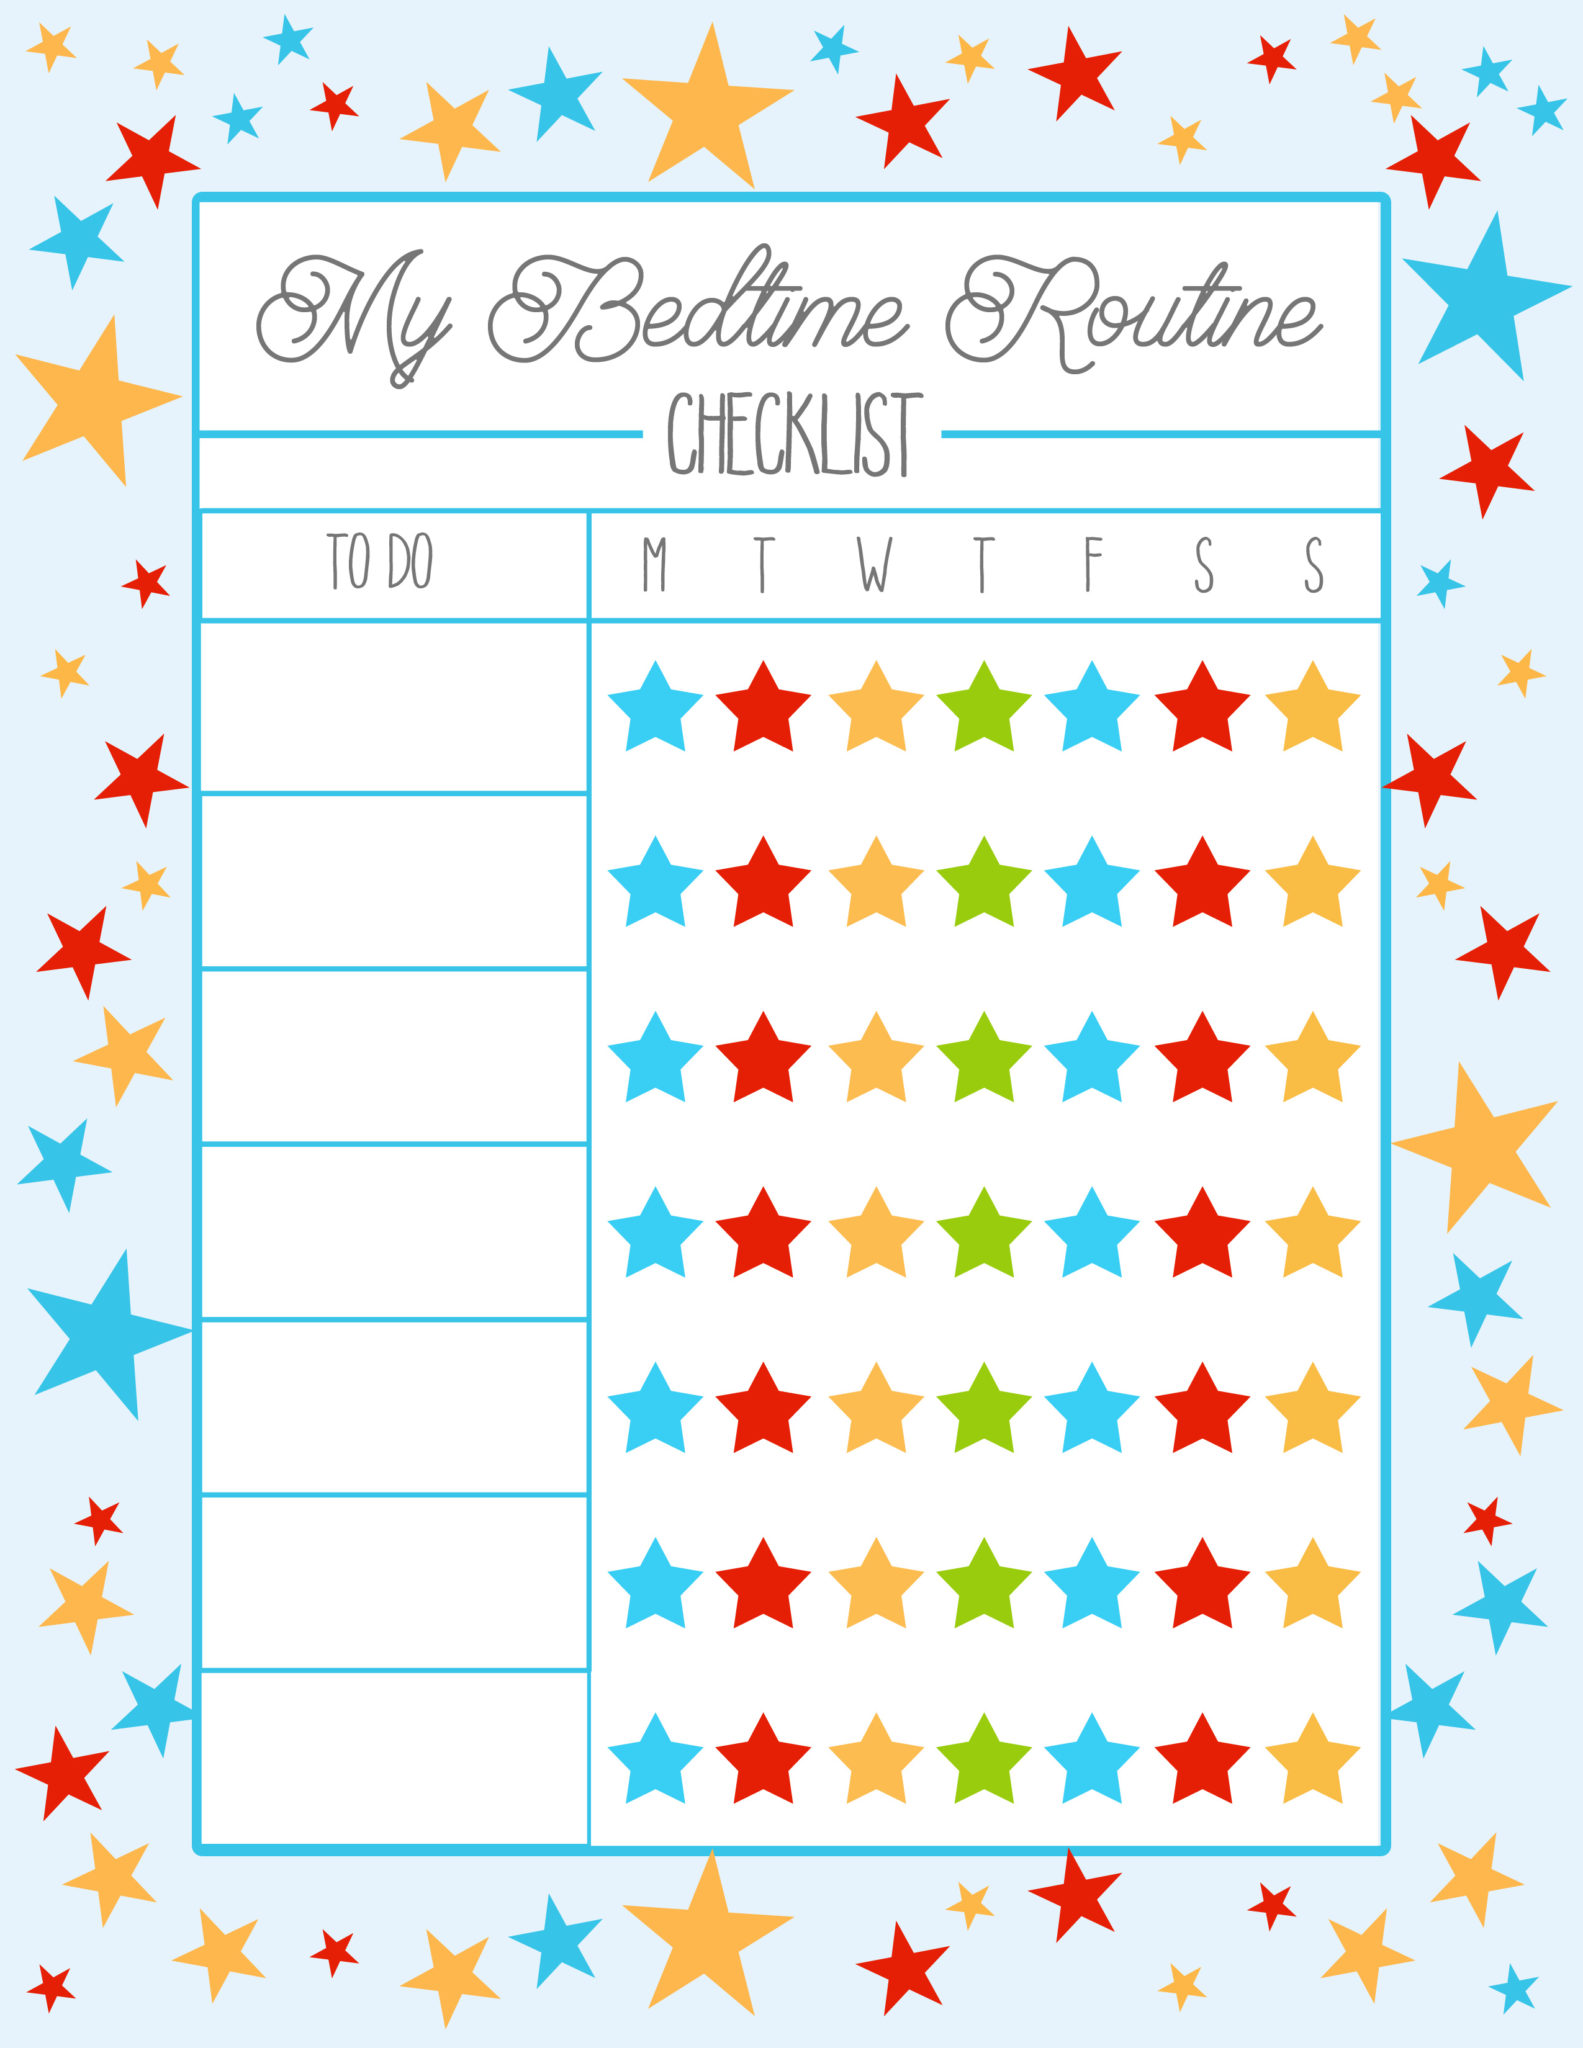 Make Your Own Bedtime Routine Chart